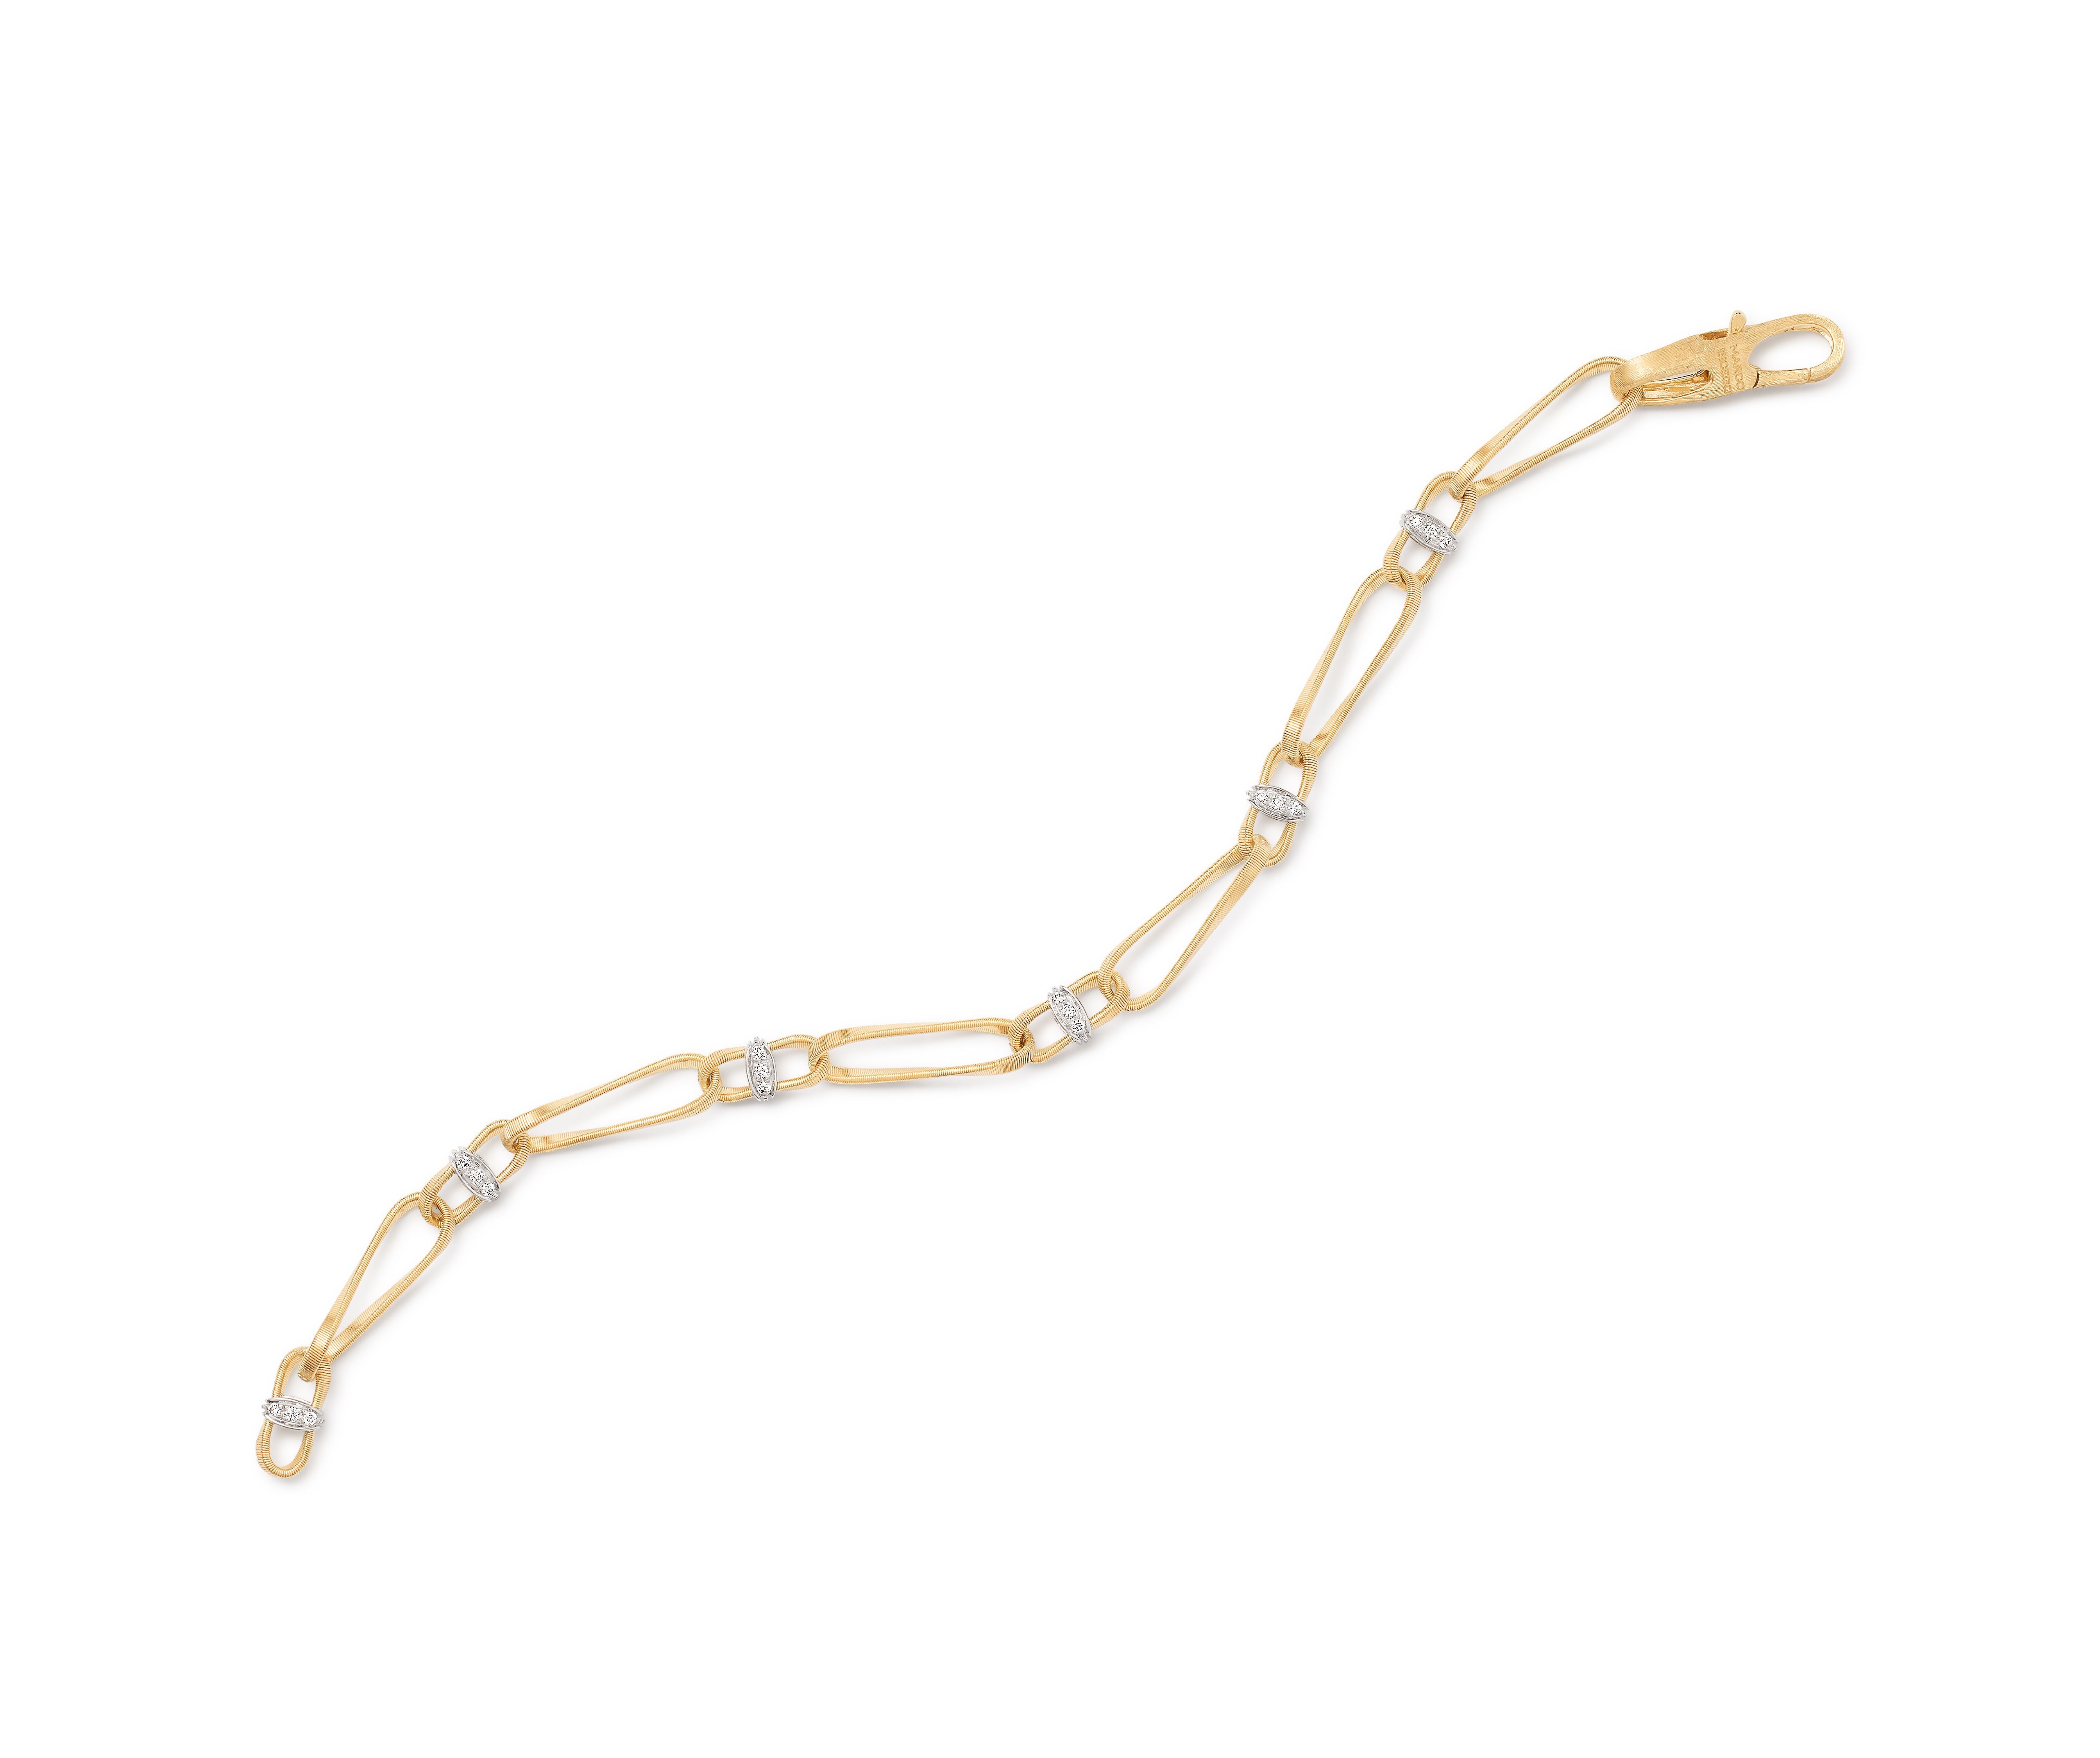 18K YELLOW GOLD TWISTED COIL LINK BRACELET WITH DIAMONDS